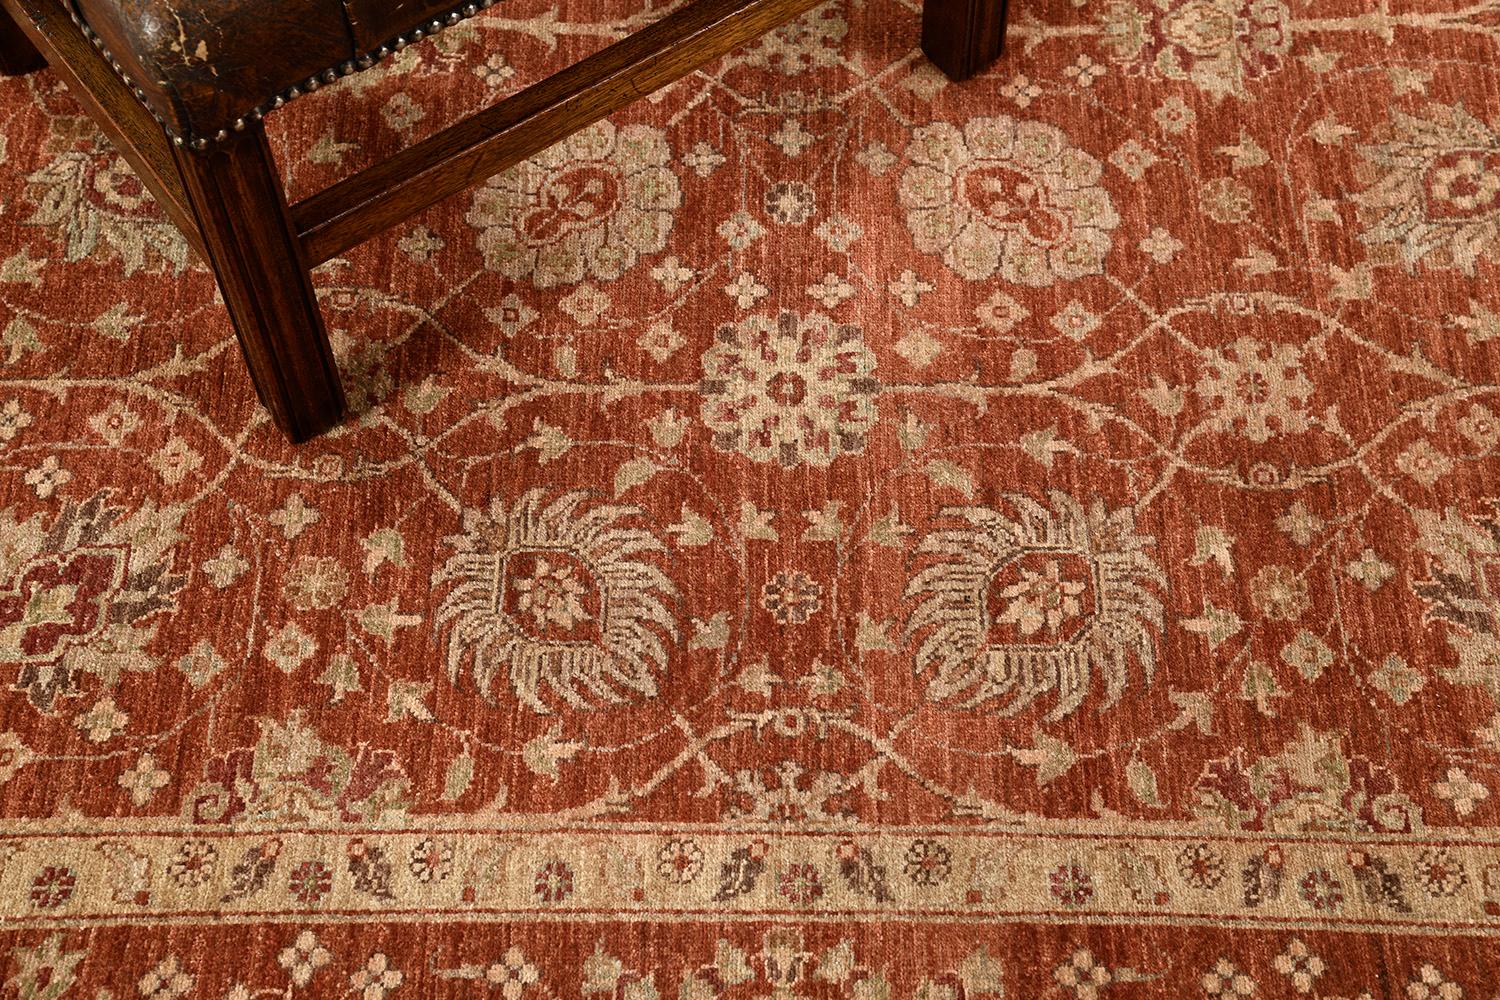 Series of symbolic motifs and ornaments are reflected through neutral tones of embellishments to telling a historical event in the terracotta field. The borders are beautifully hand-woven that created from a vegetable dye to form an elegant Persian